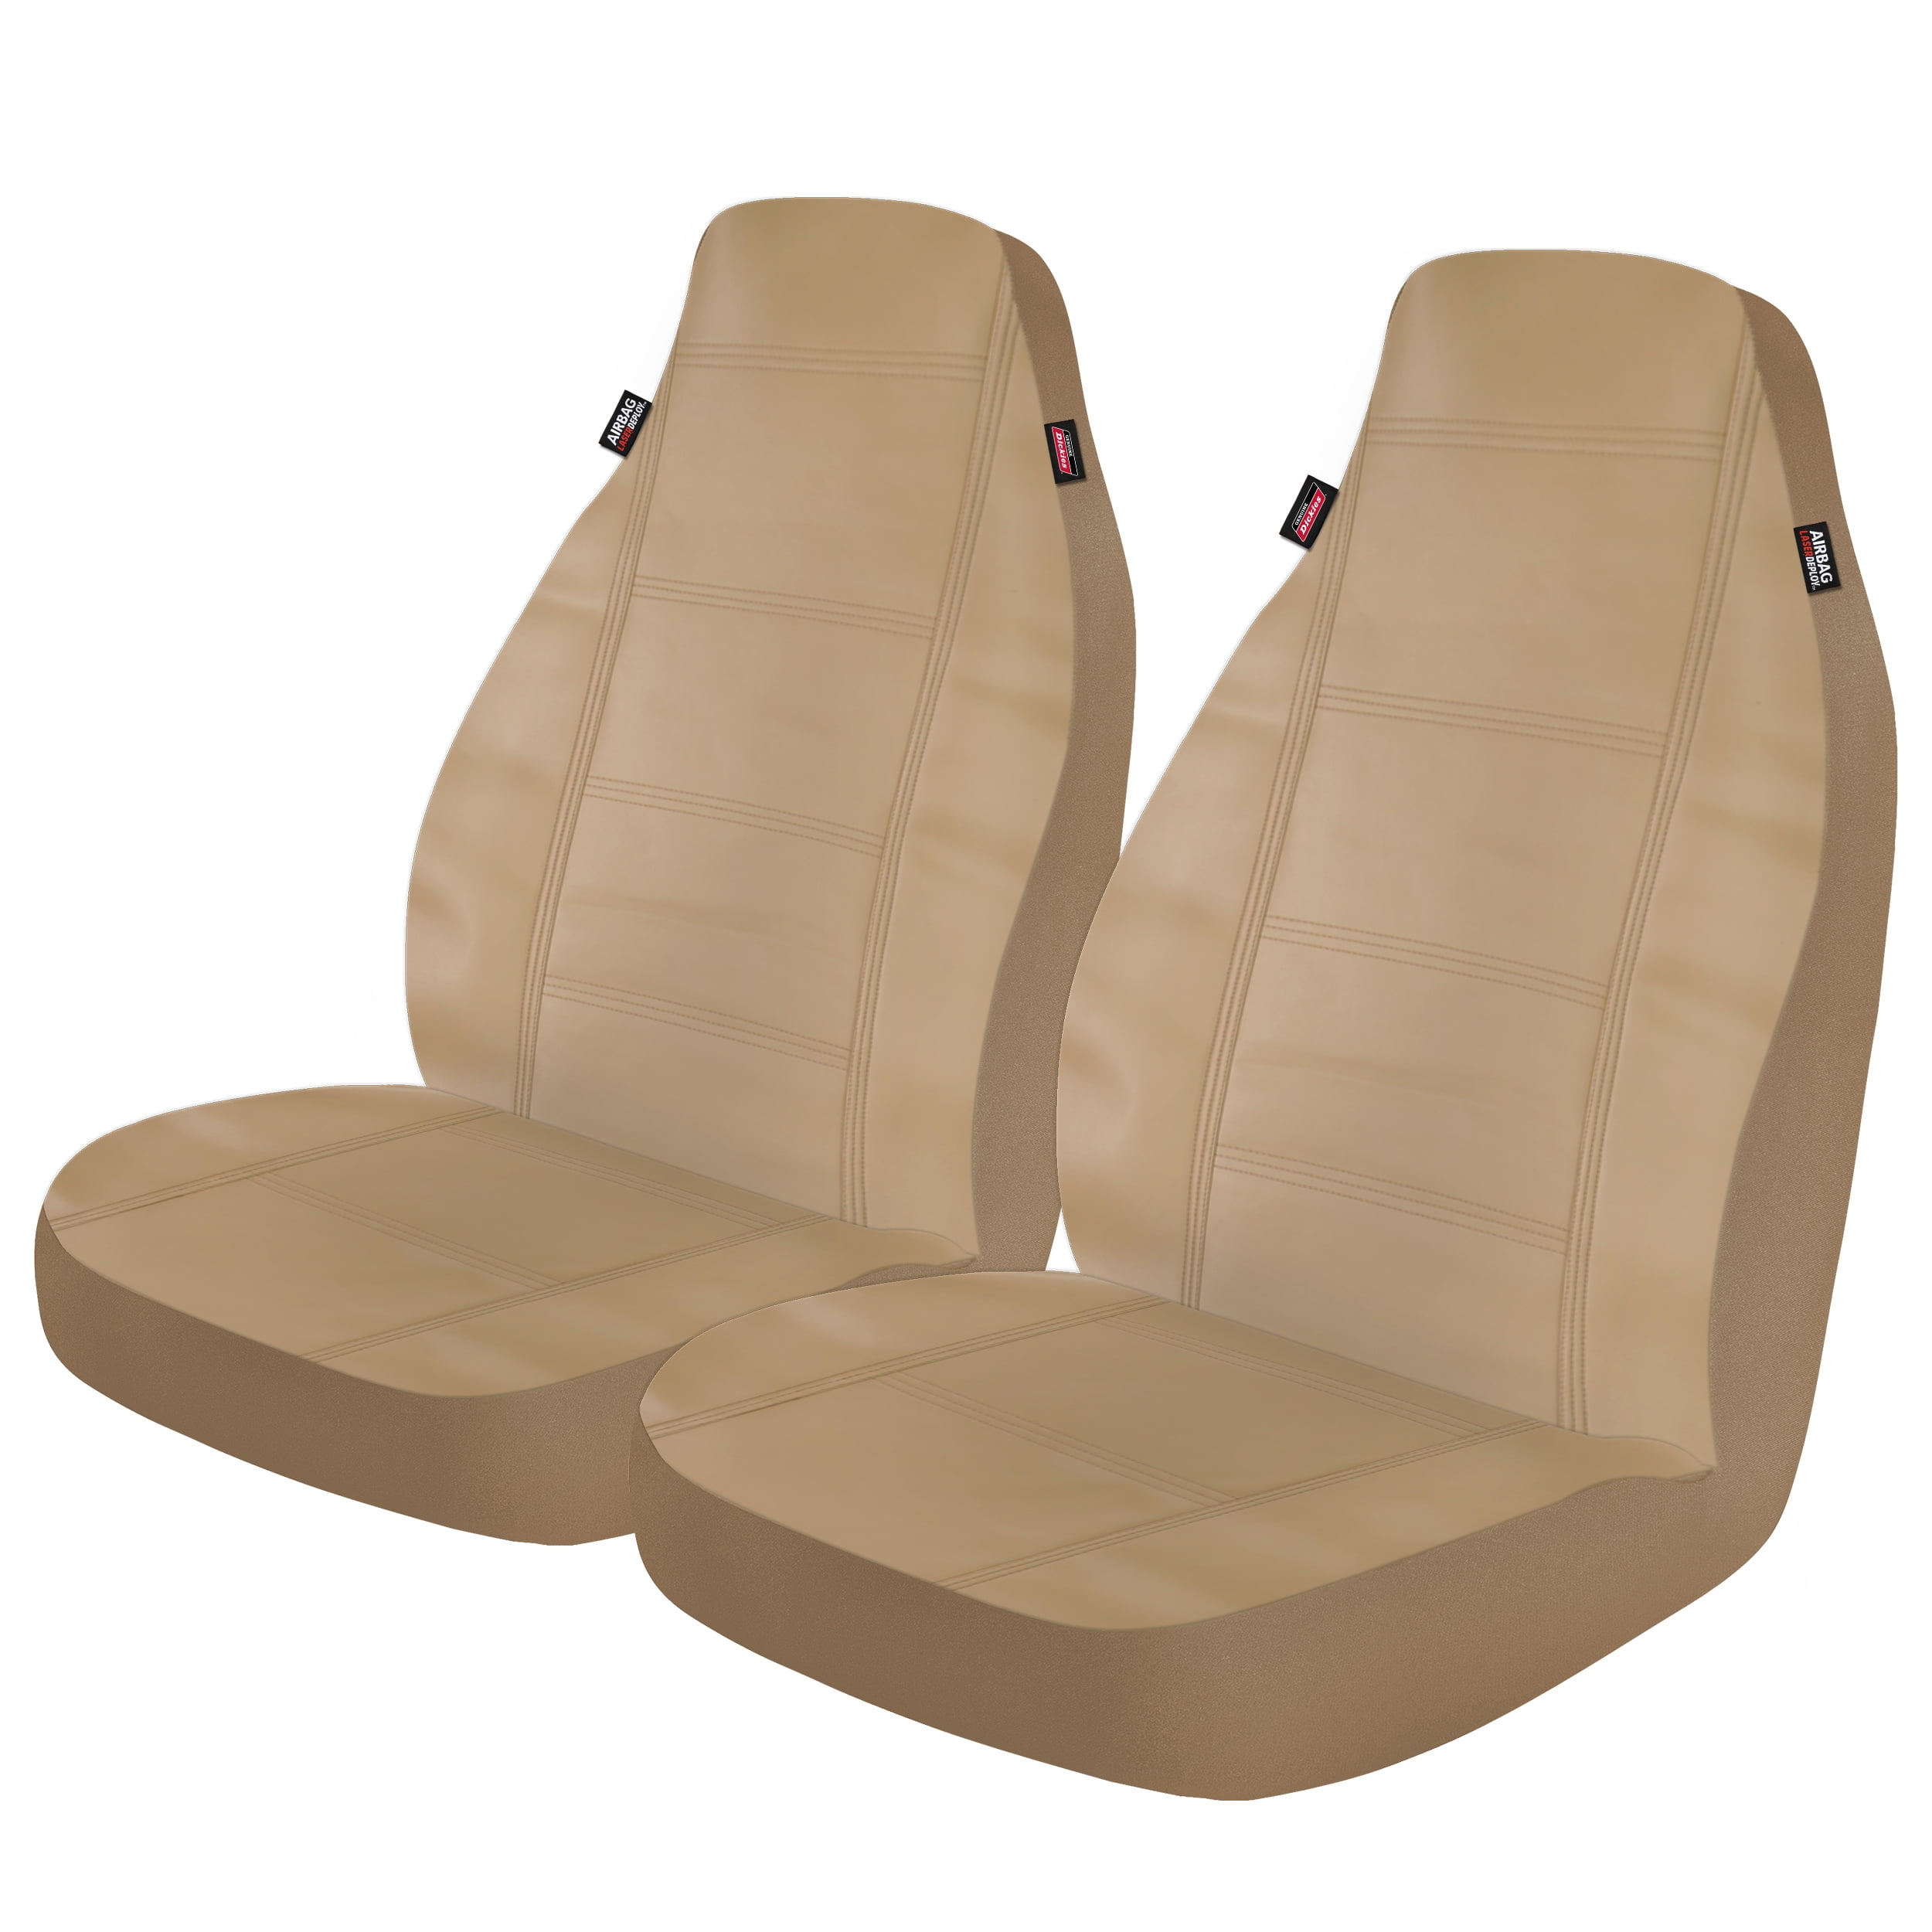 carXS PU Leather Car Seat Covers Full Set Front & Rear Cover in Tan Beige